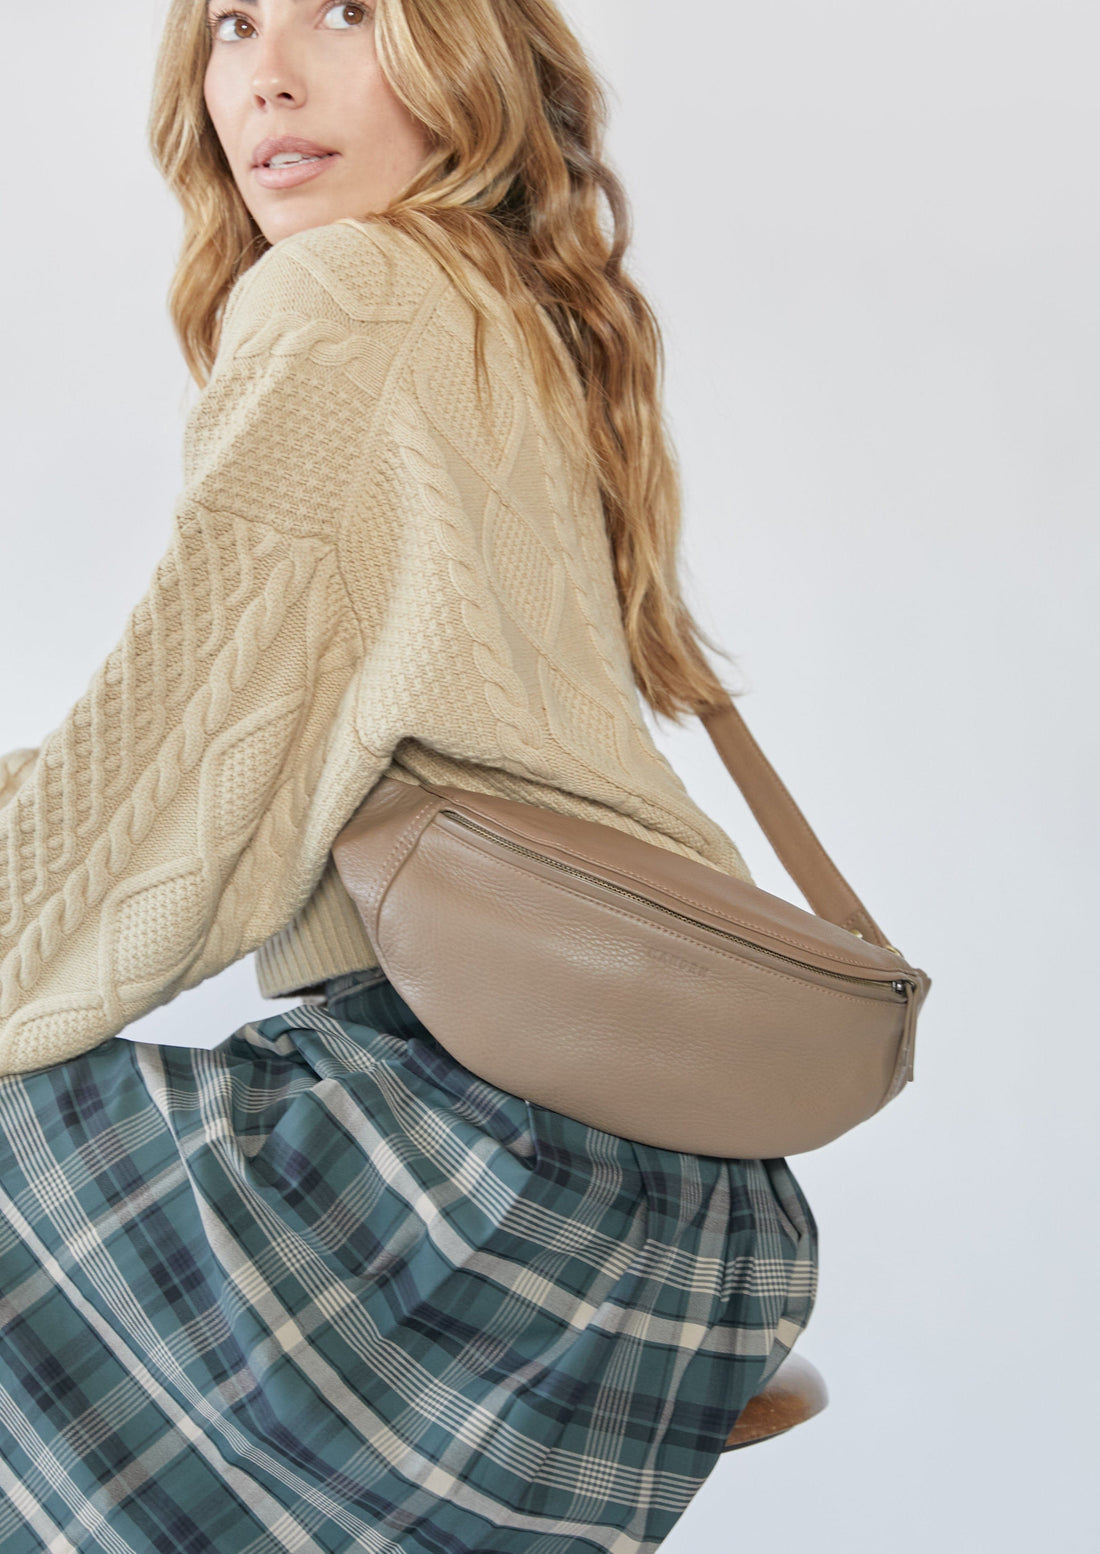 MANDRN  The Woven Atlas- Tan Leather Fanny Pack